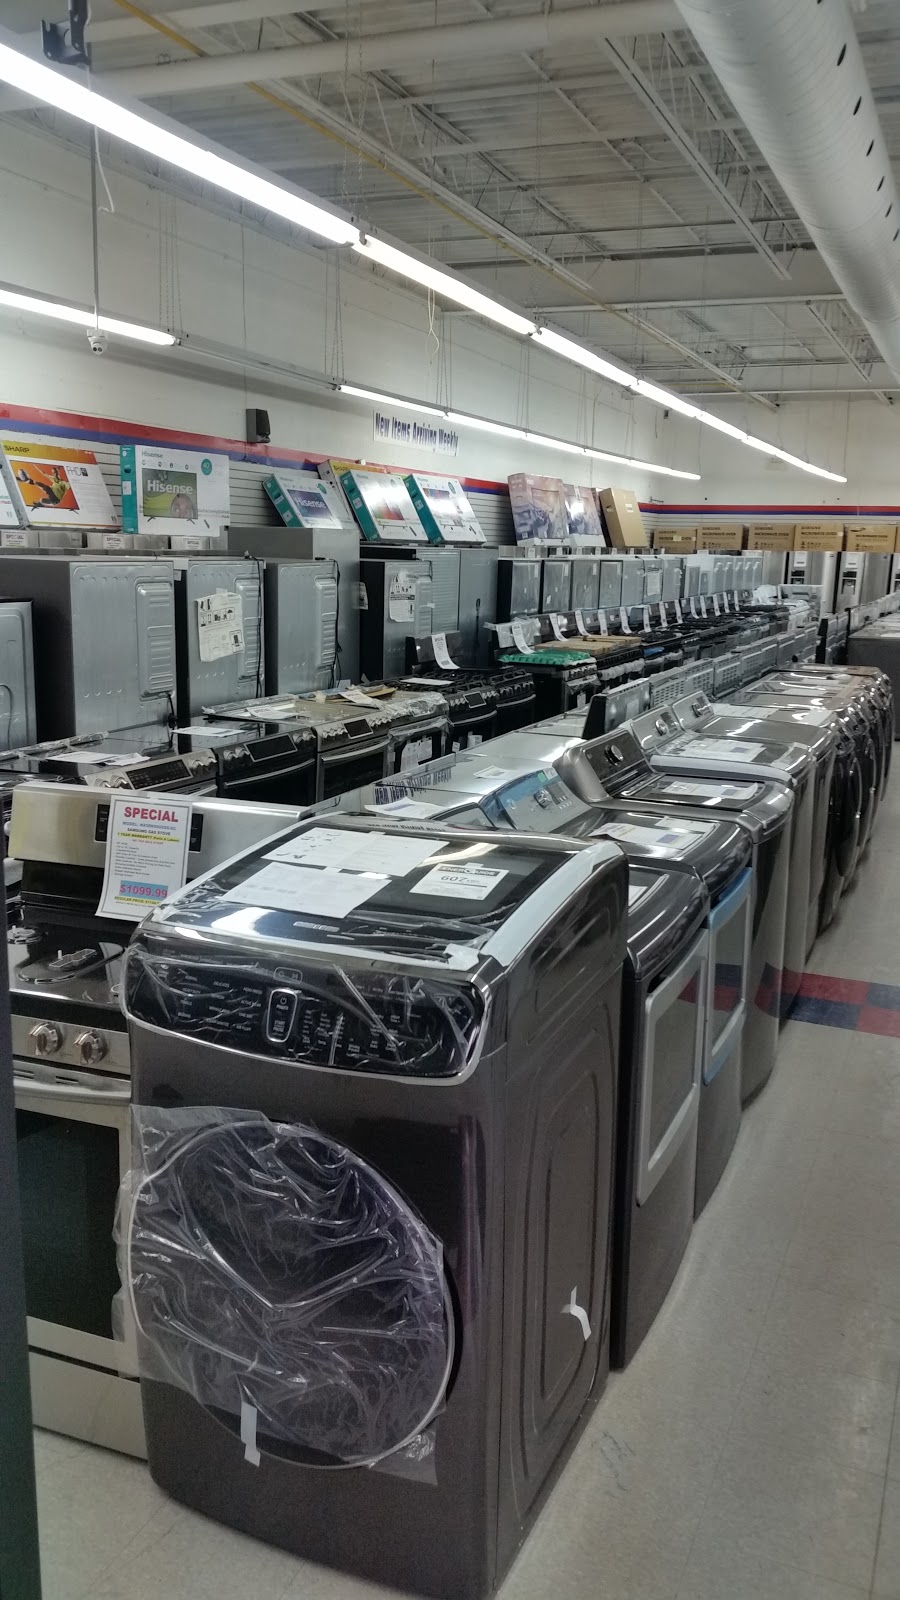 CAN-AM APPLIANCES CENTRE | home goods store | 144 Kennedy Rd S Unit 6, Brampton, ON L6W 1H8, Canada | 9054516660 OR +1 905-451-6660